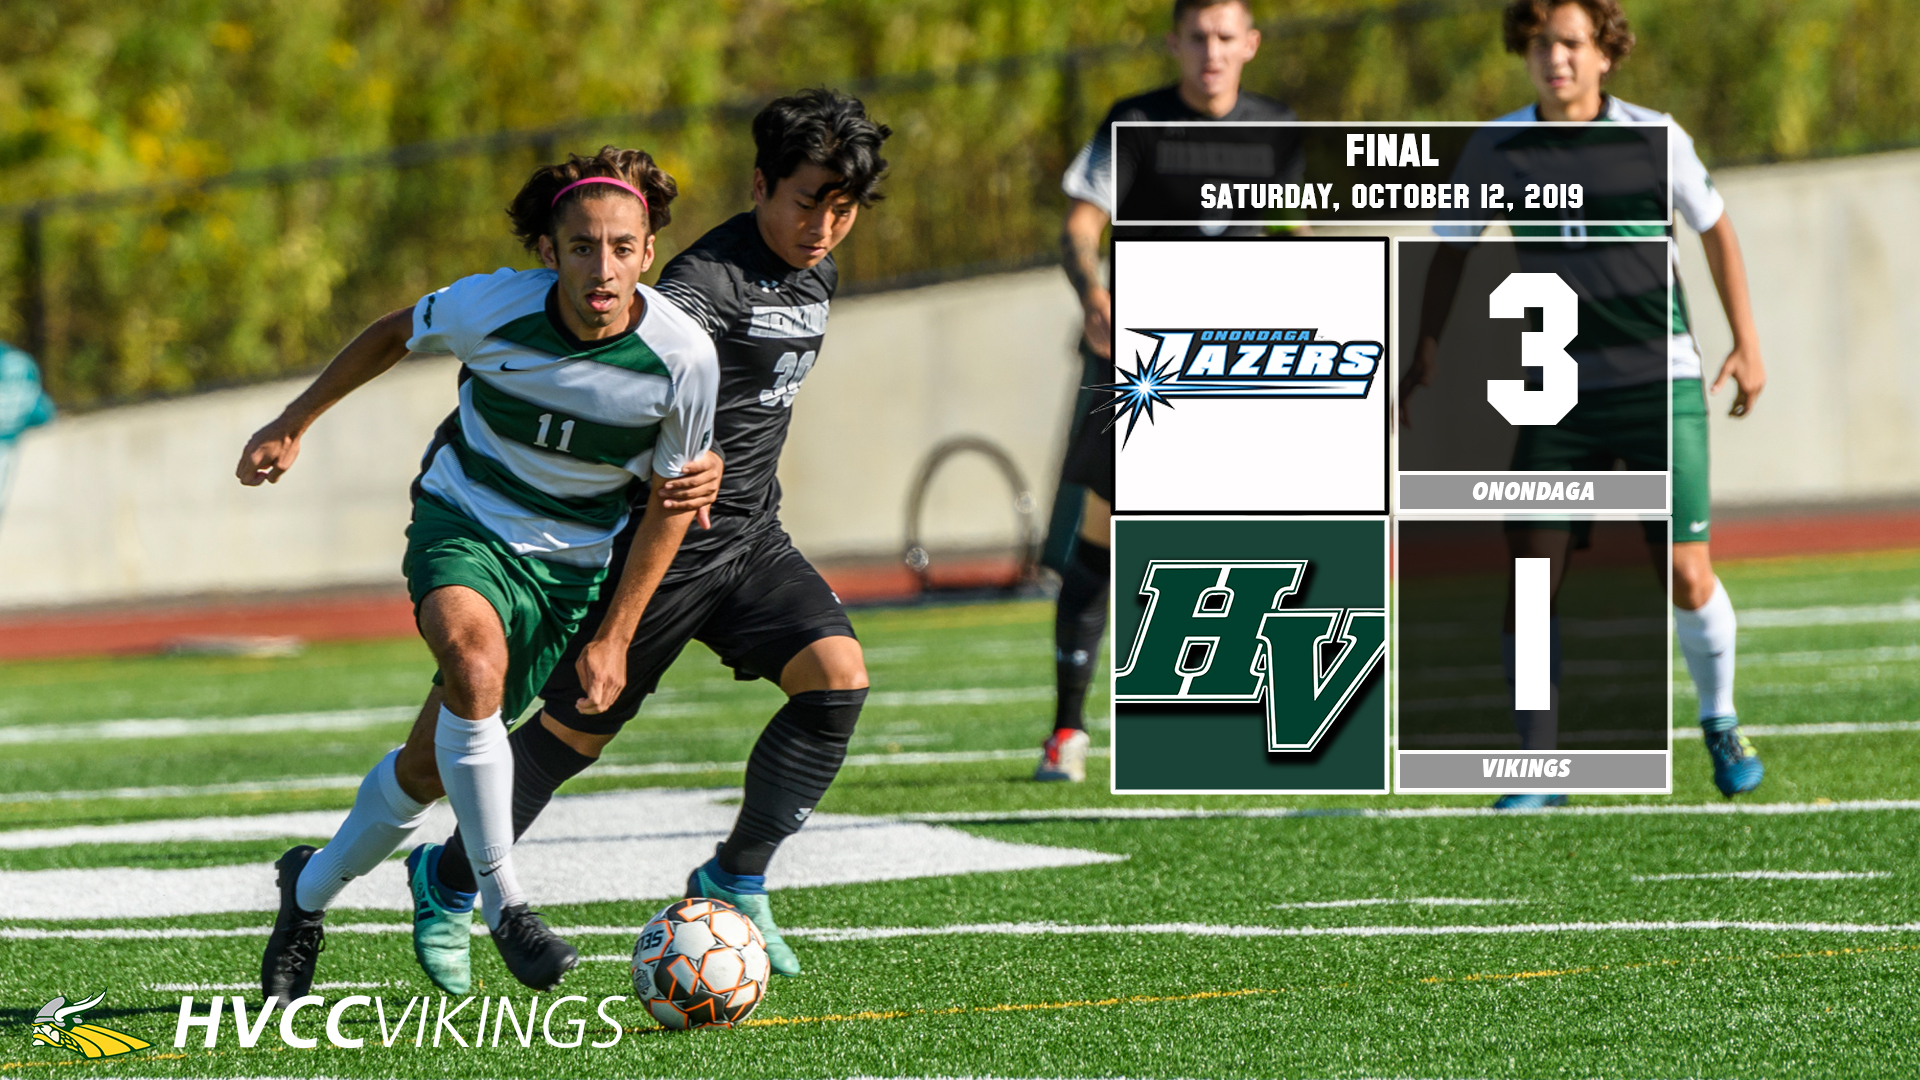 Men's soccer defeated by Onondaga 3-1 on Oct. 12, 2019